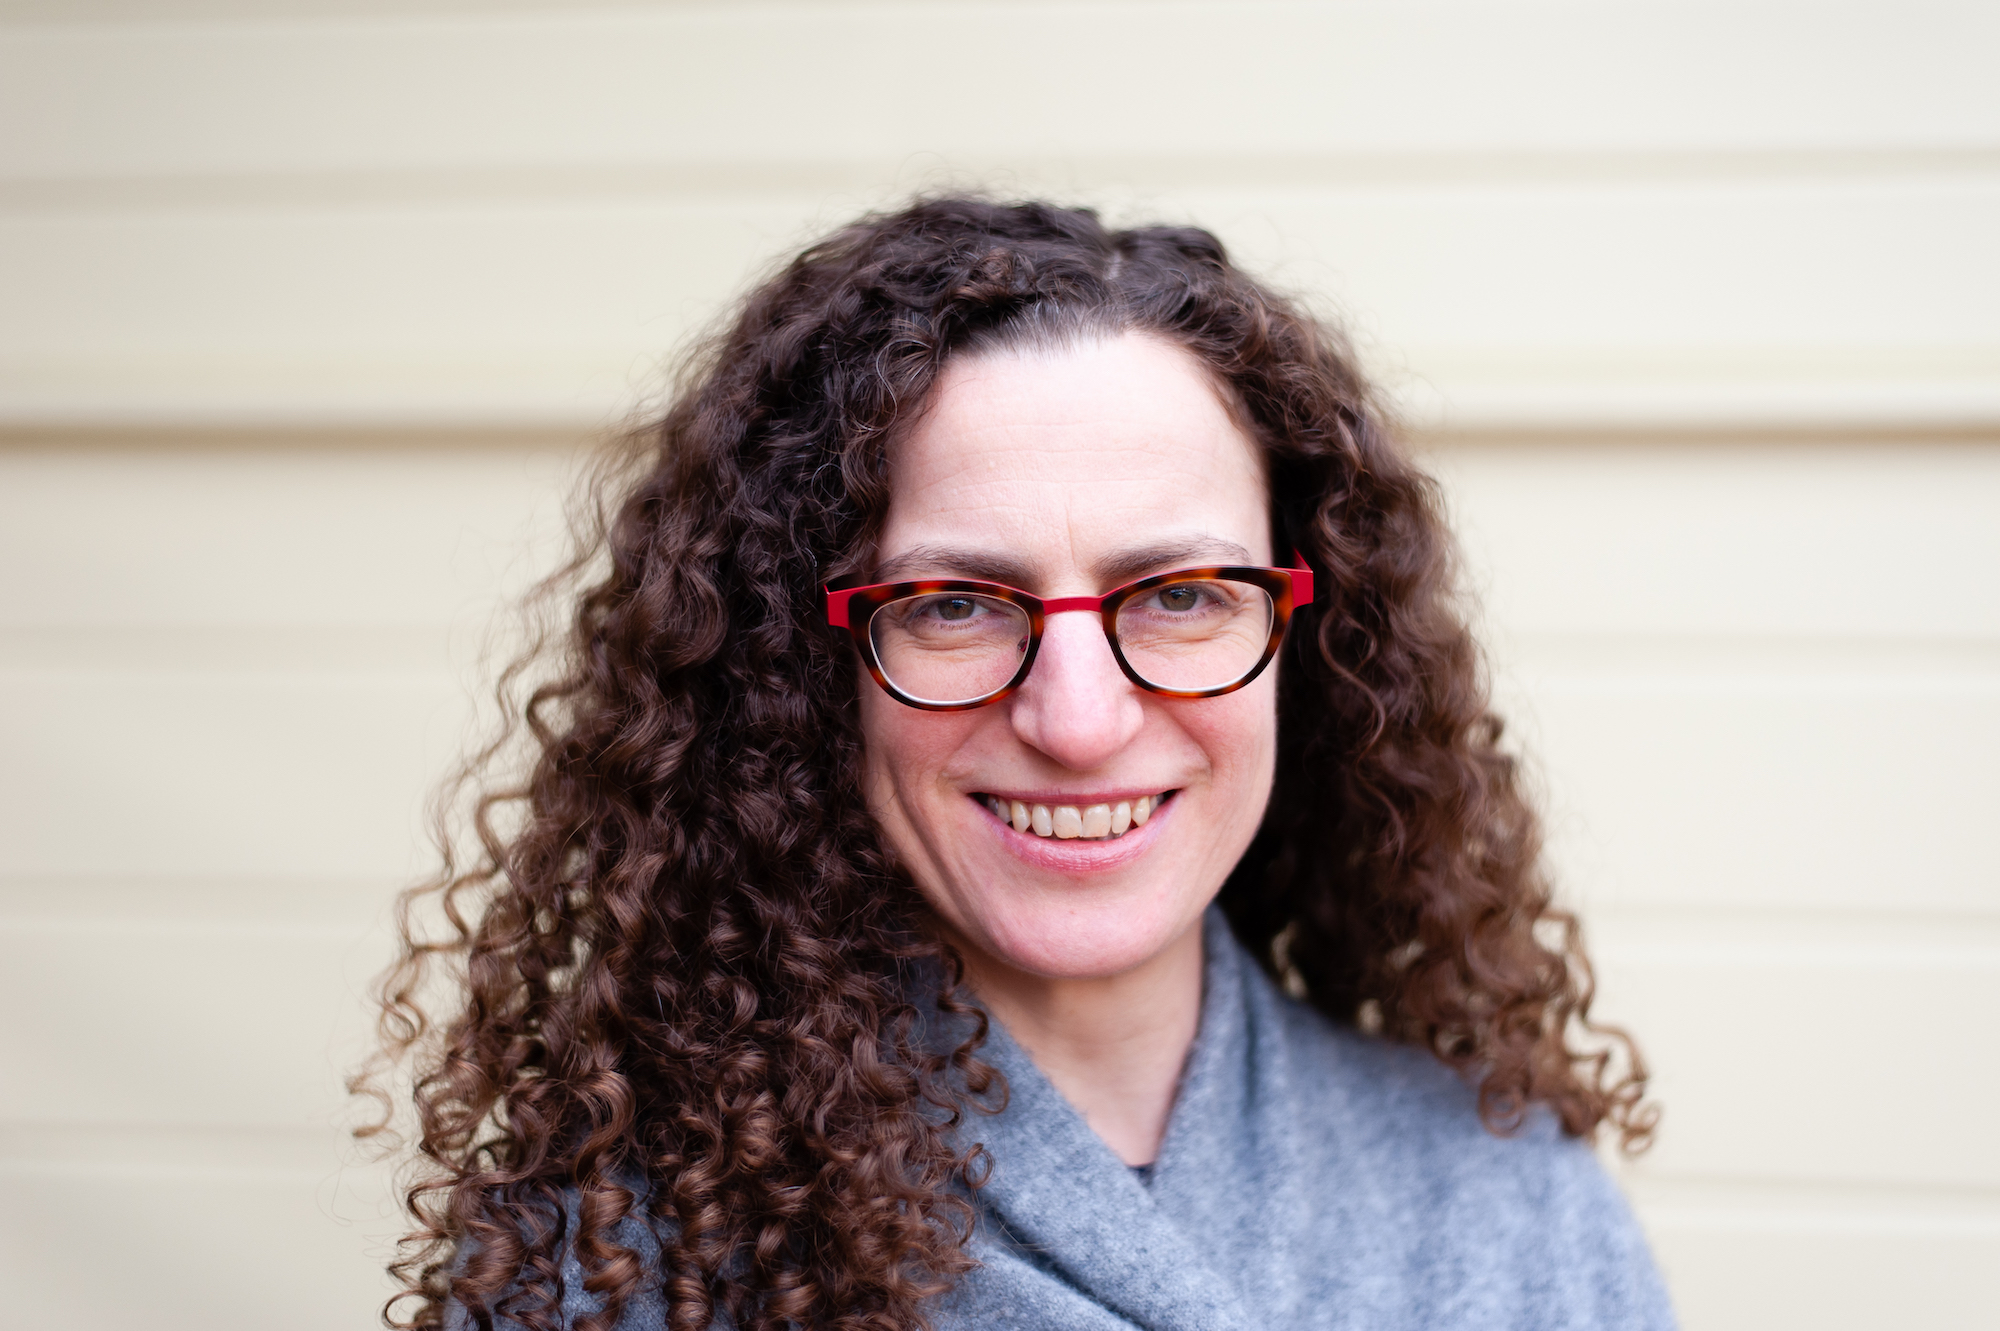 Picture of Amy Hofer, who is wearing glasses and has curly brown hair.